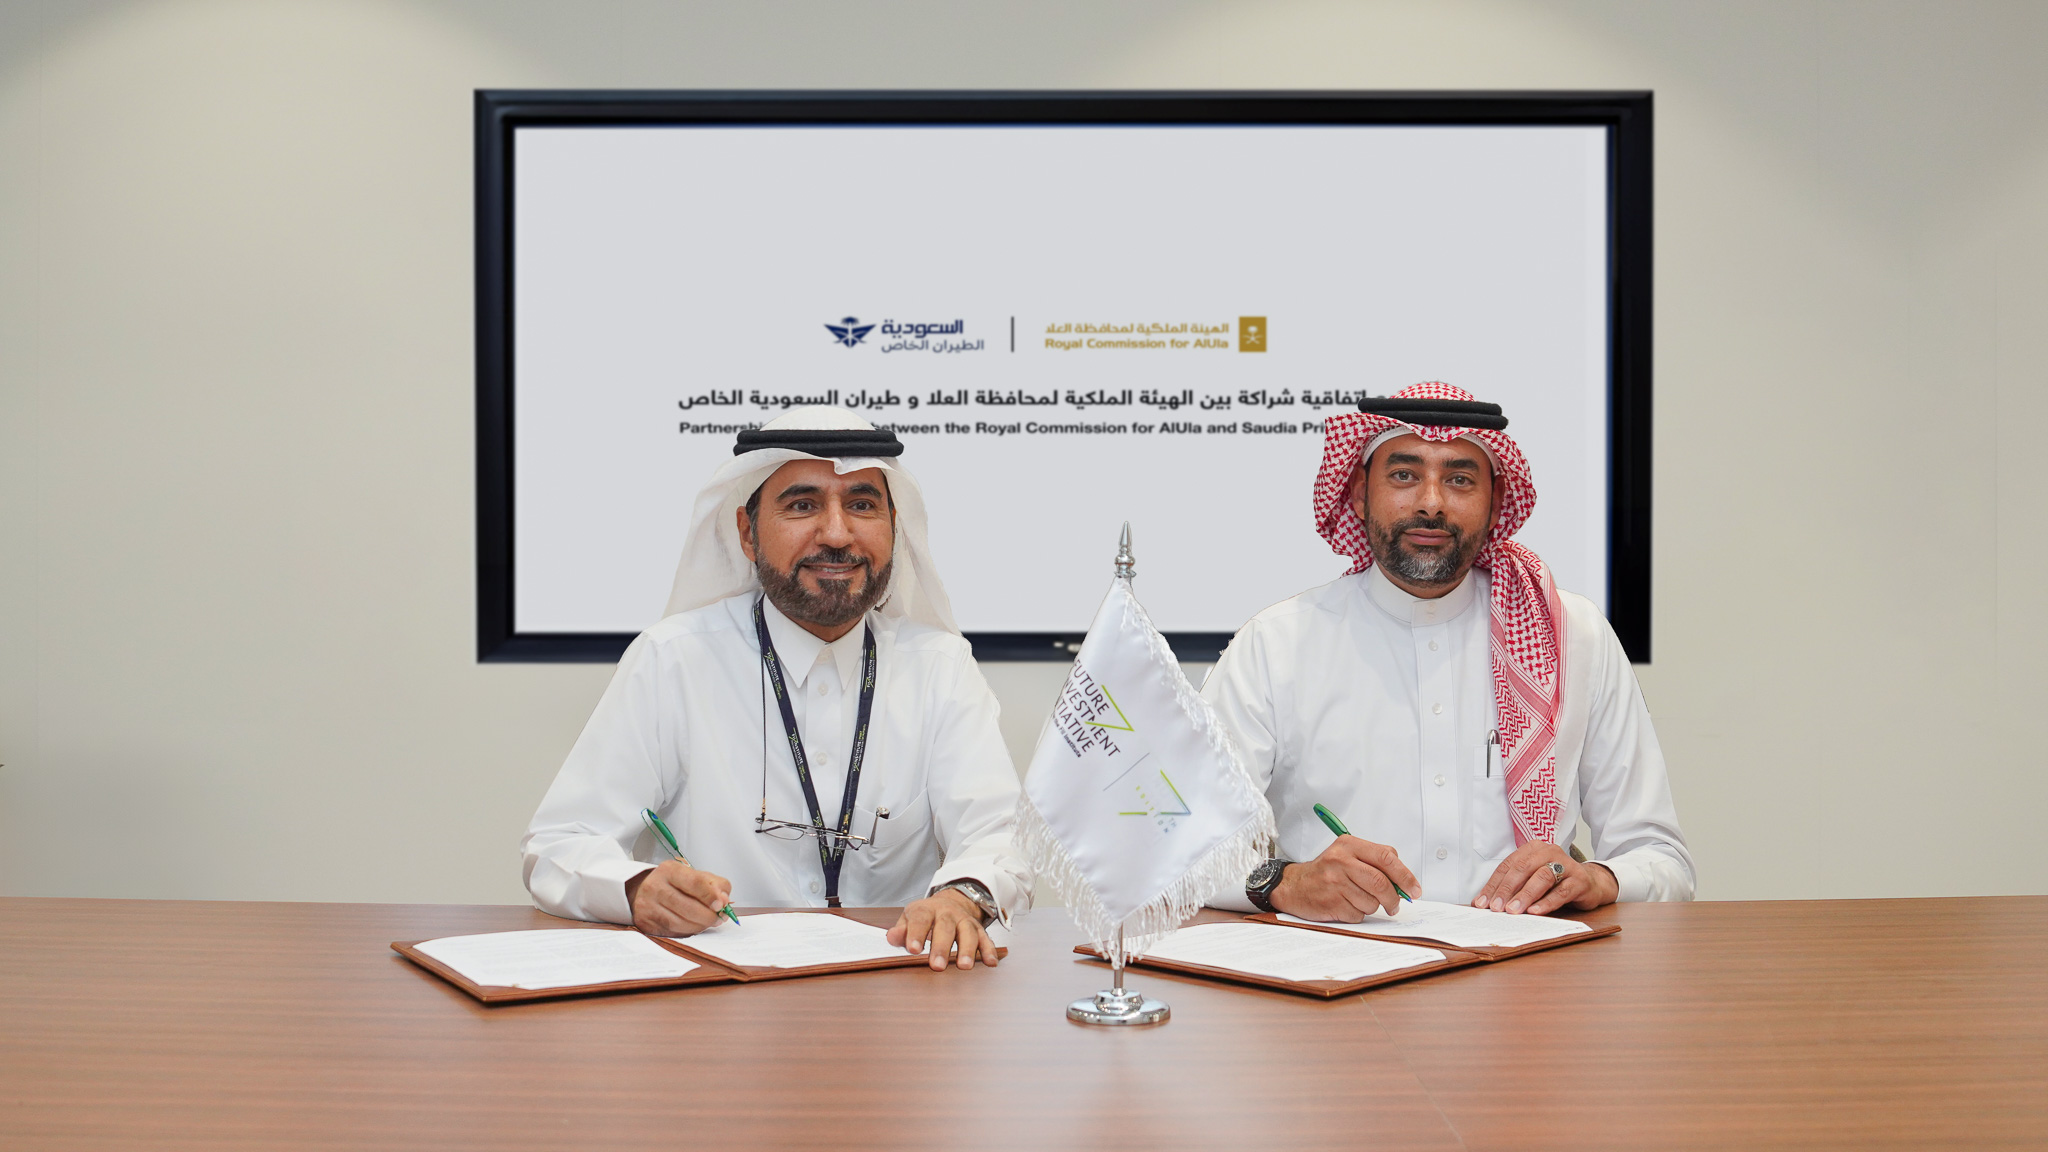 ALULA’S AMBITION TO INCREASE CONNECTIVITY AND ACCESSIBILITY FOR GLOBAL VVIP TRAVELLERS BOOSTED BY NEW STRATEGIC AGREEMENT BETWEEN ROYAL COMMISSION FOR ALULA AND SAUDIA PRIVATE